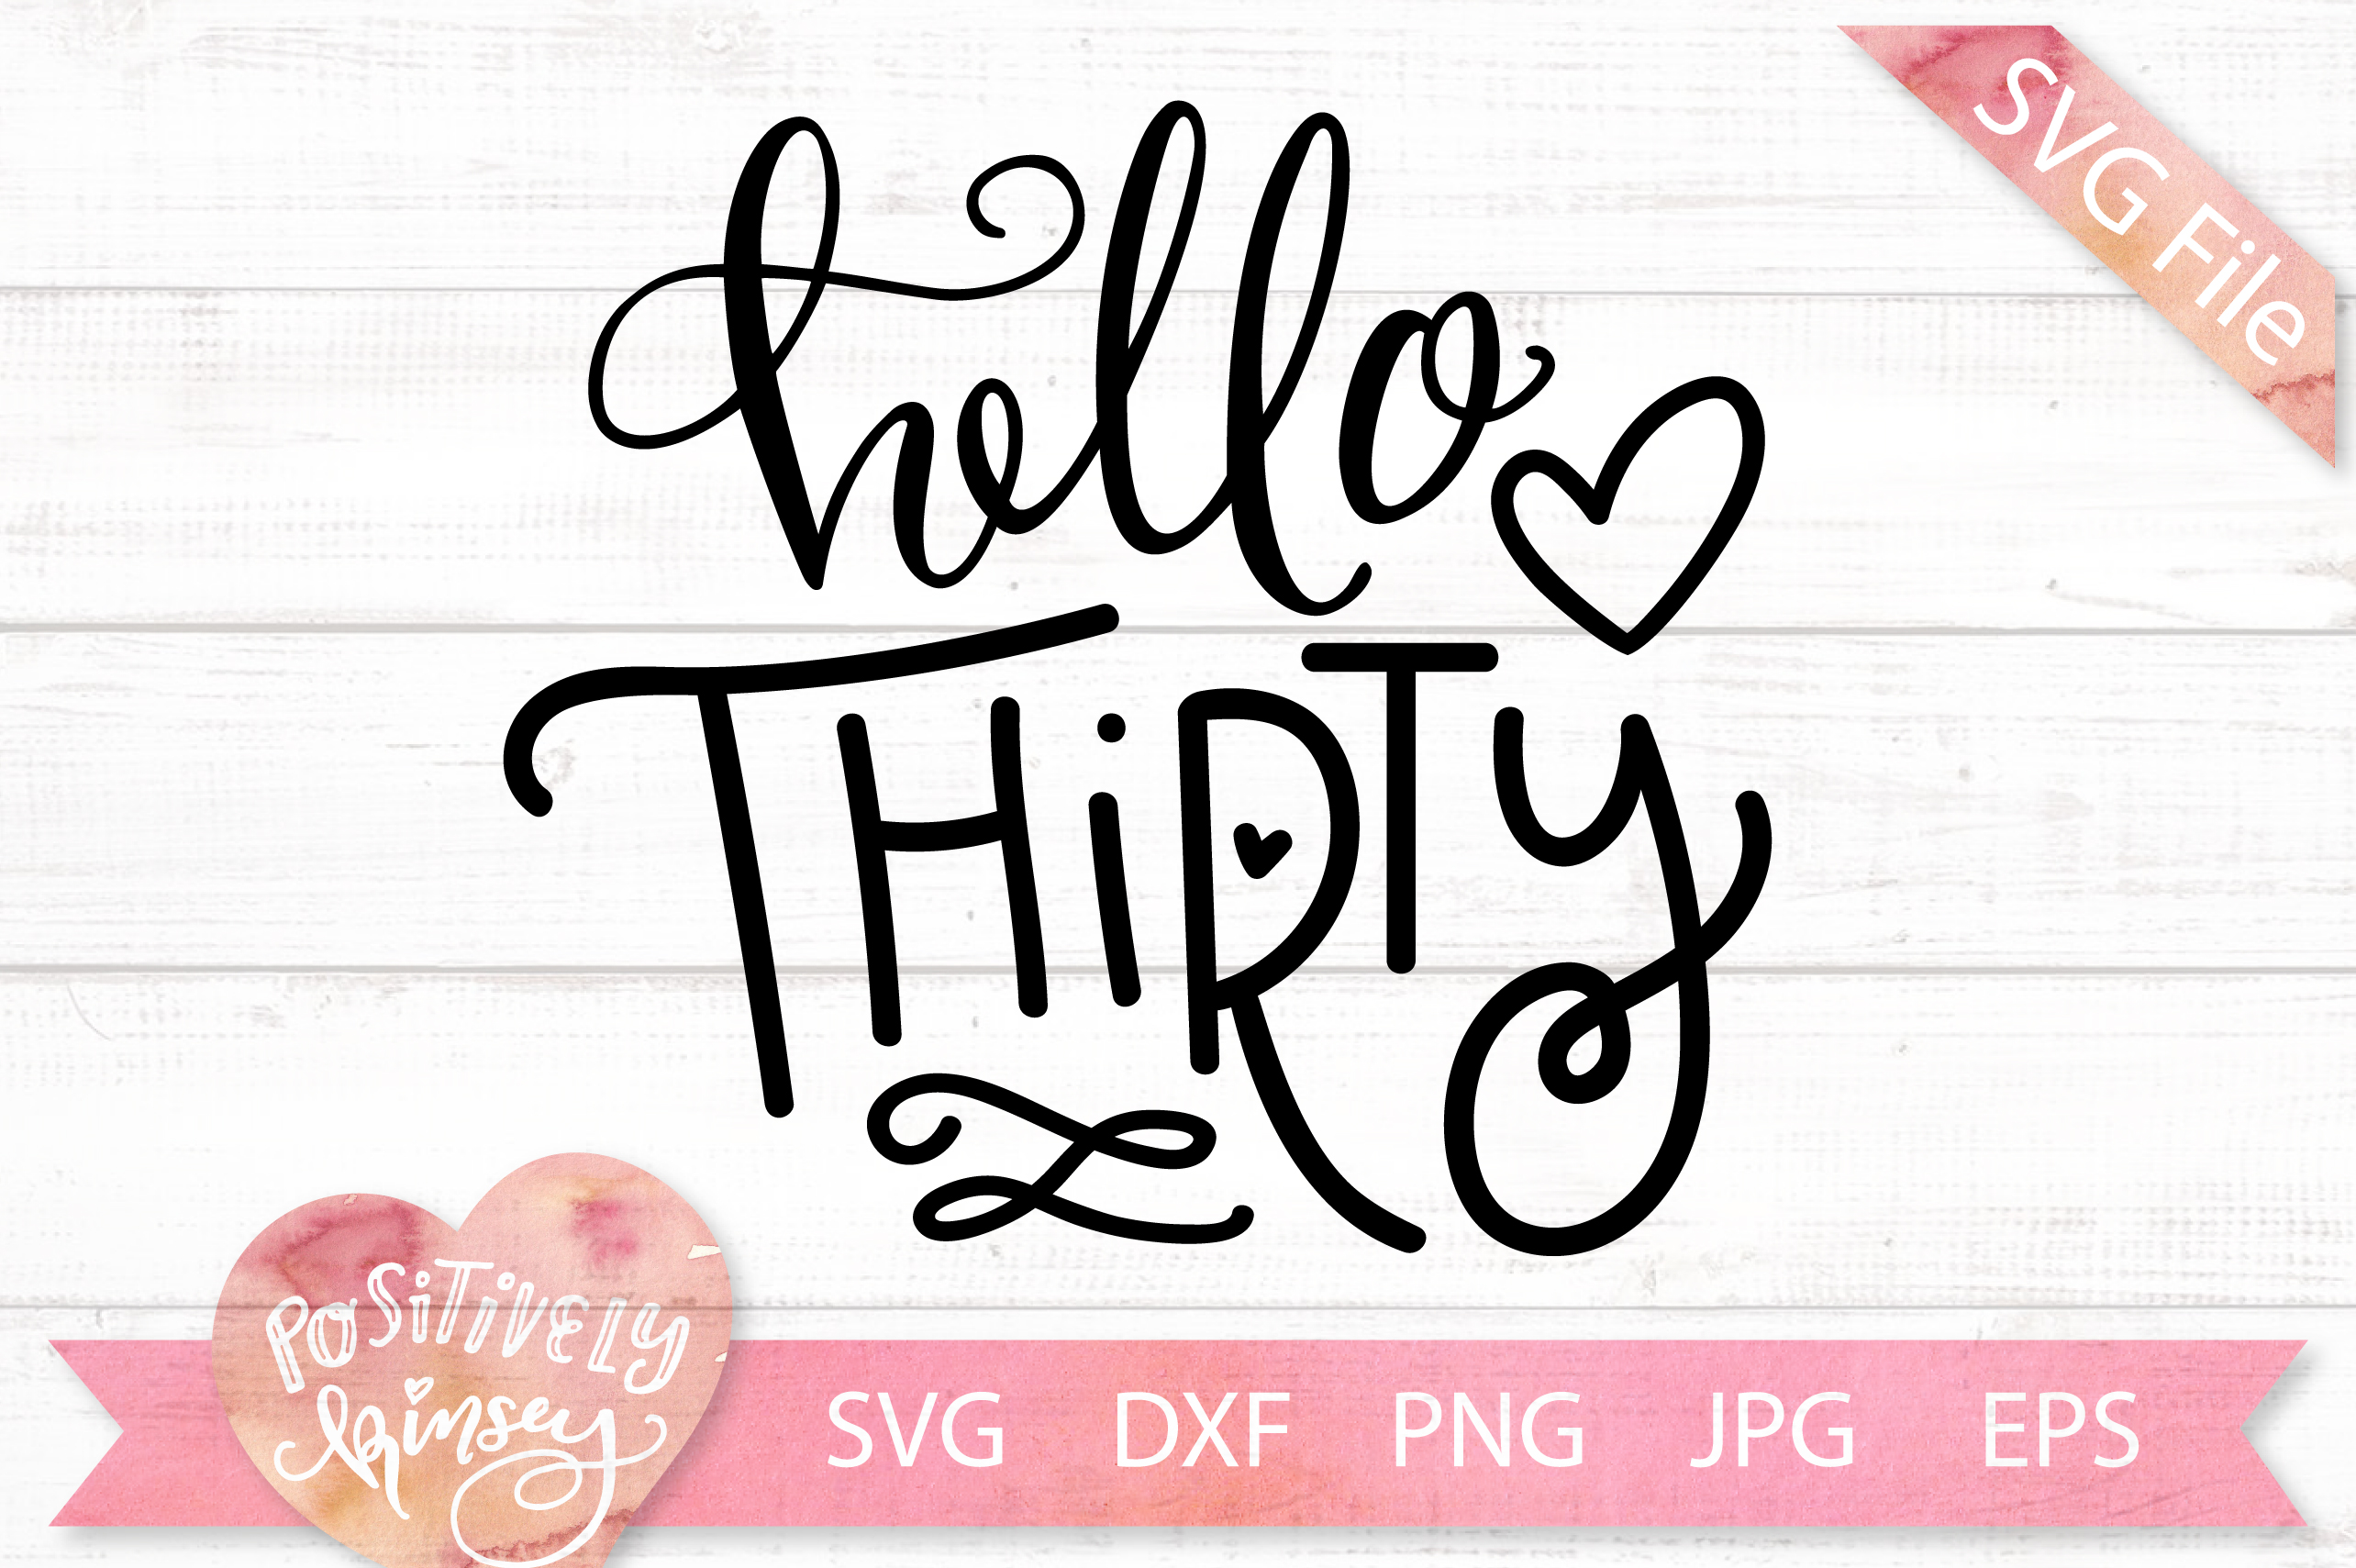 Download 30th Birthday SVG DXF PNG JPG EPS Hello Thirty Hello 30 ...